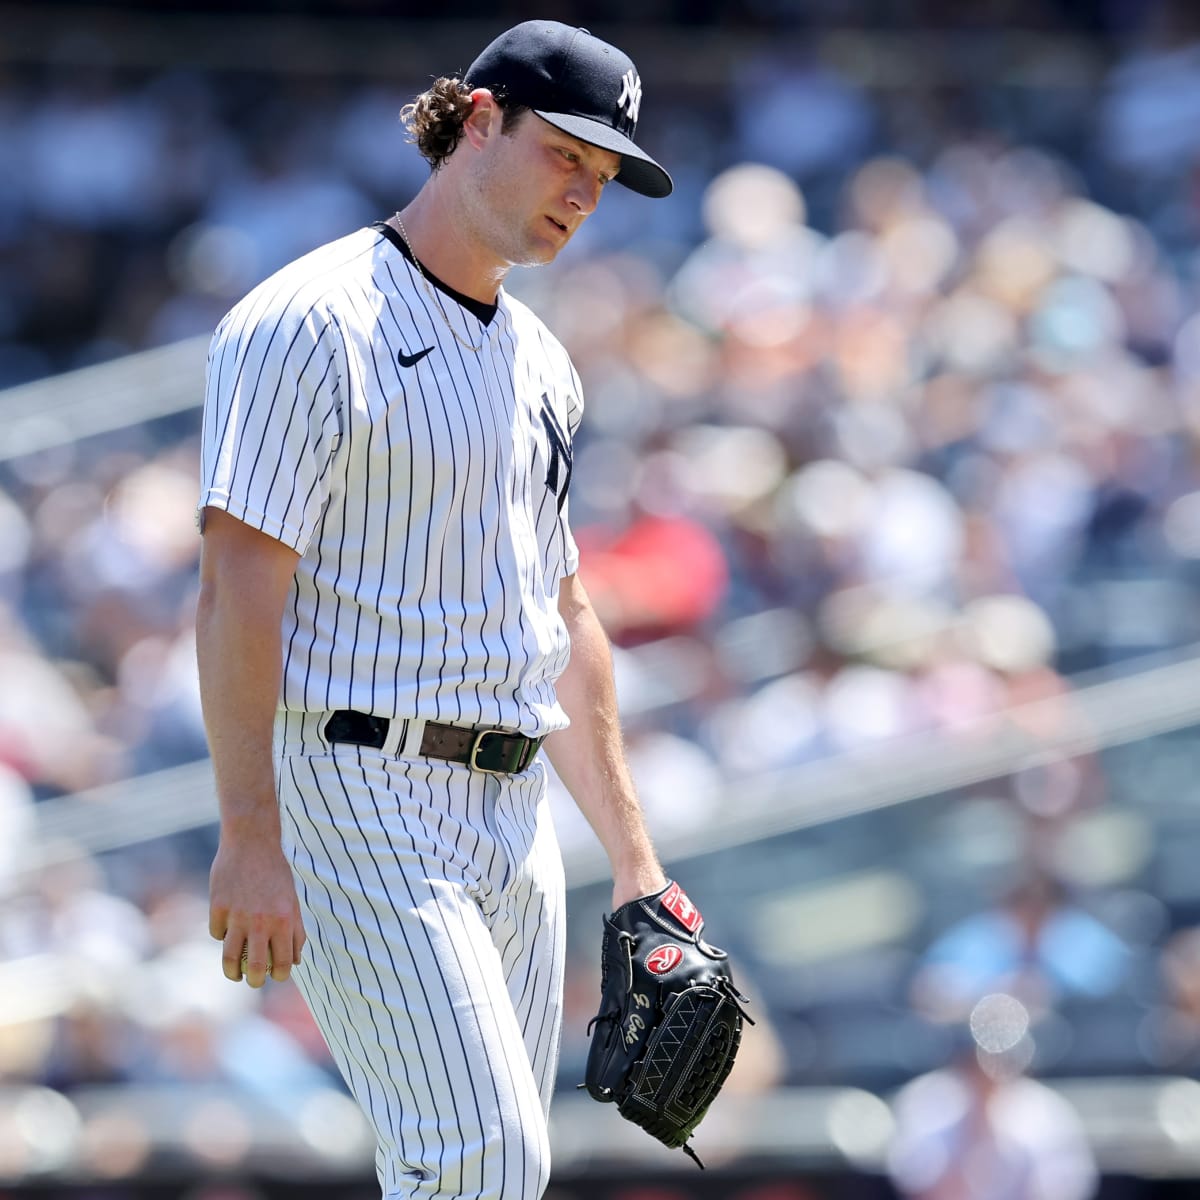 Clay Holmes blows save as Yankees fall to Royals after comeback